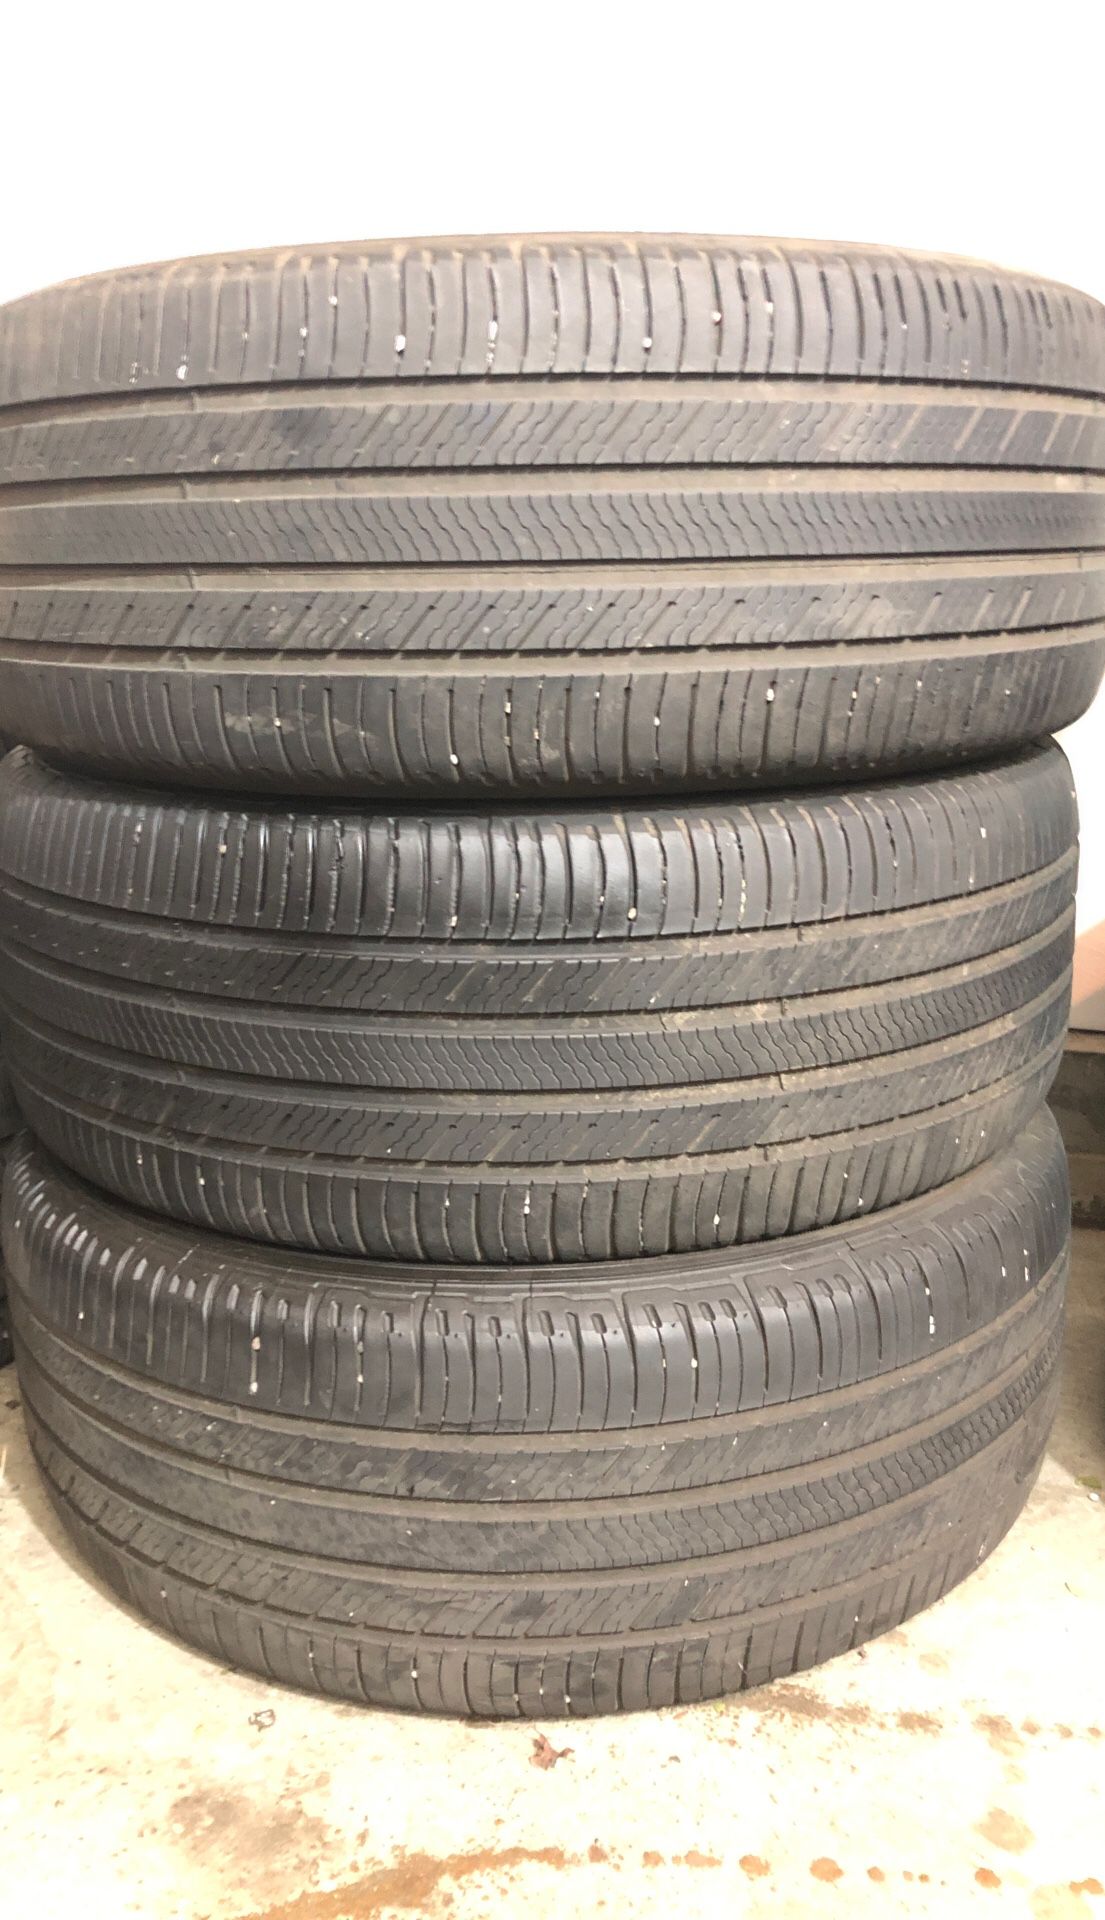 Michelin 255/45/20 tires 3 only. 75 takes all 3